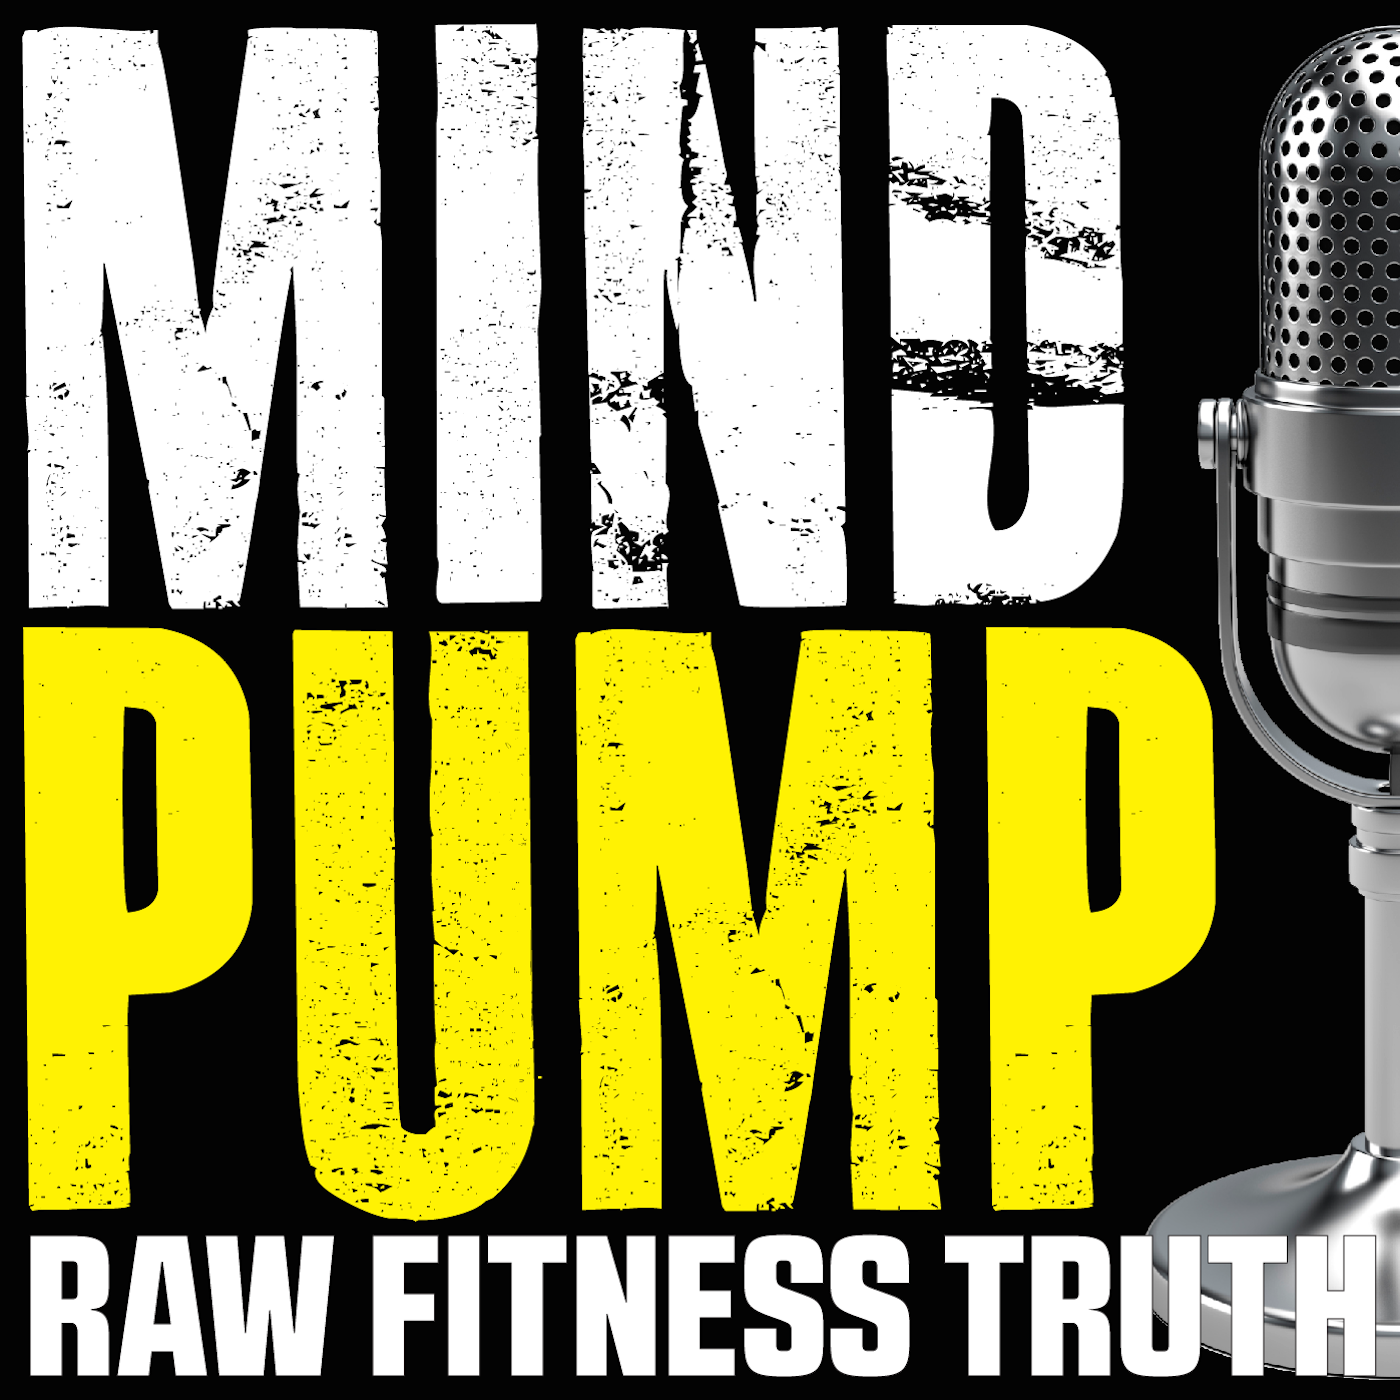 037: Meal Timing, Number of Sets & Lagging Body Parts